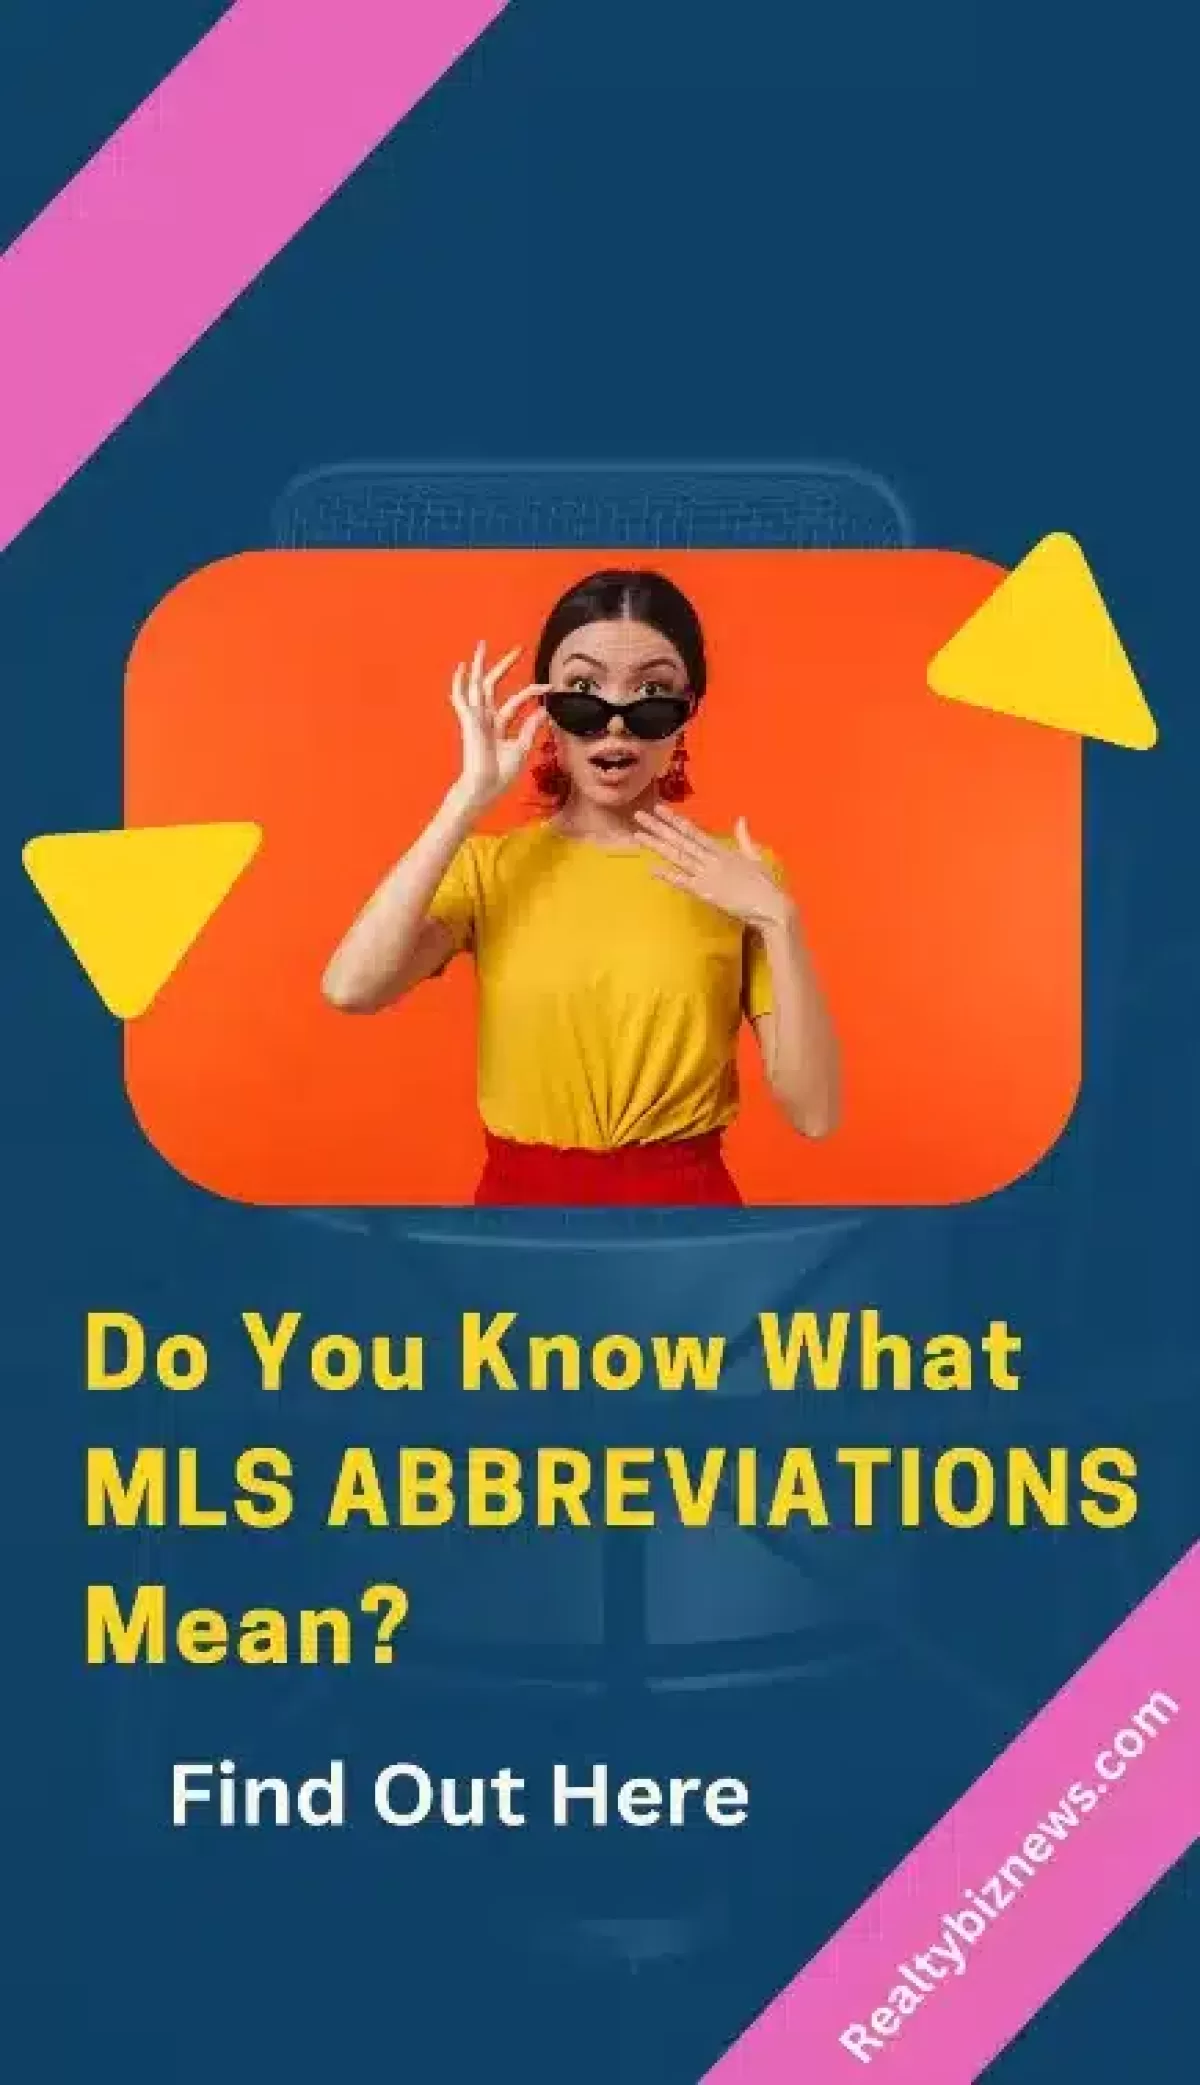 Real estate abbreviations in the MLS